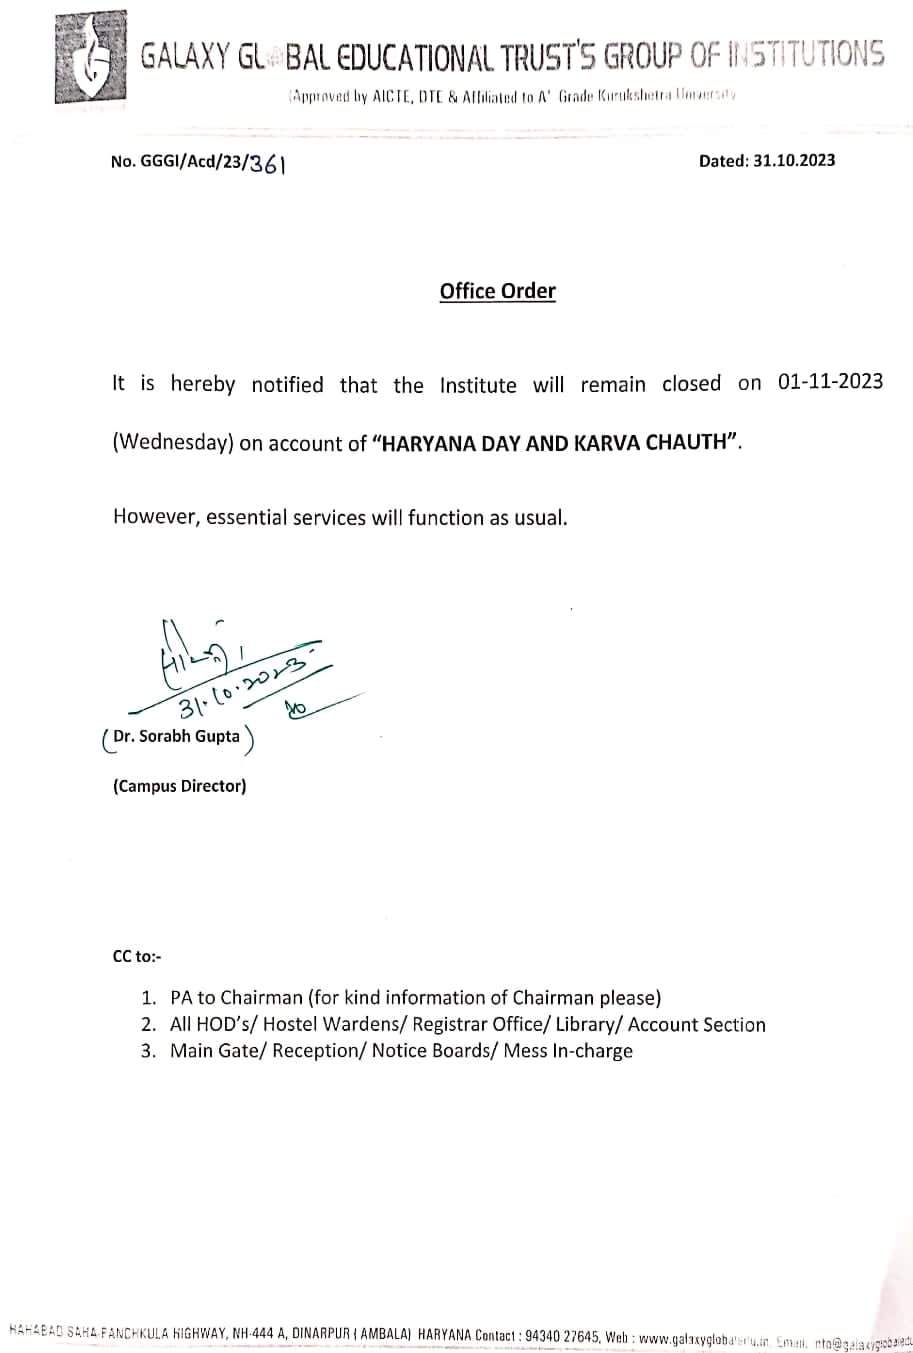 Institute will remain closed on 01 November, 2023 in the account of Haryana Day and Karva Chauth